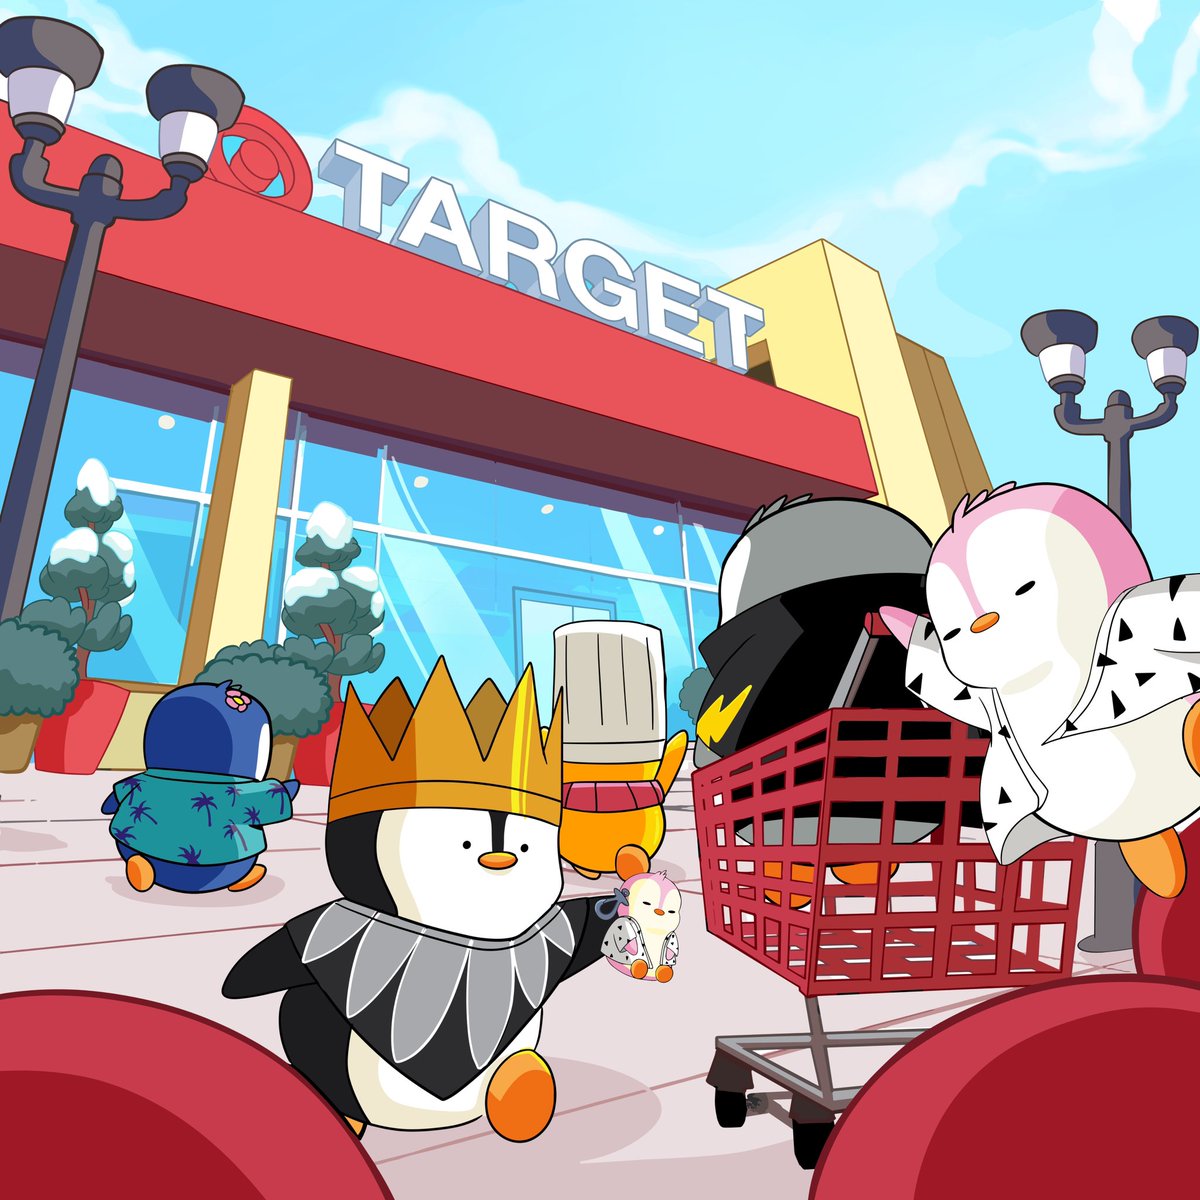 As we grow, giving our holders the opportunity to utilize and increase the impact of their IP is important to us. 

The toys that are live in @Target include community Penguins, that were fully licensed using @OverpassIP, our NFT licensing platform.